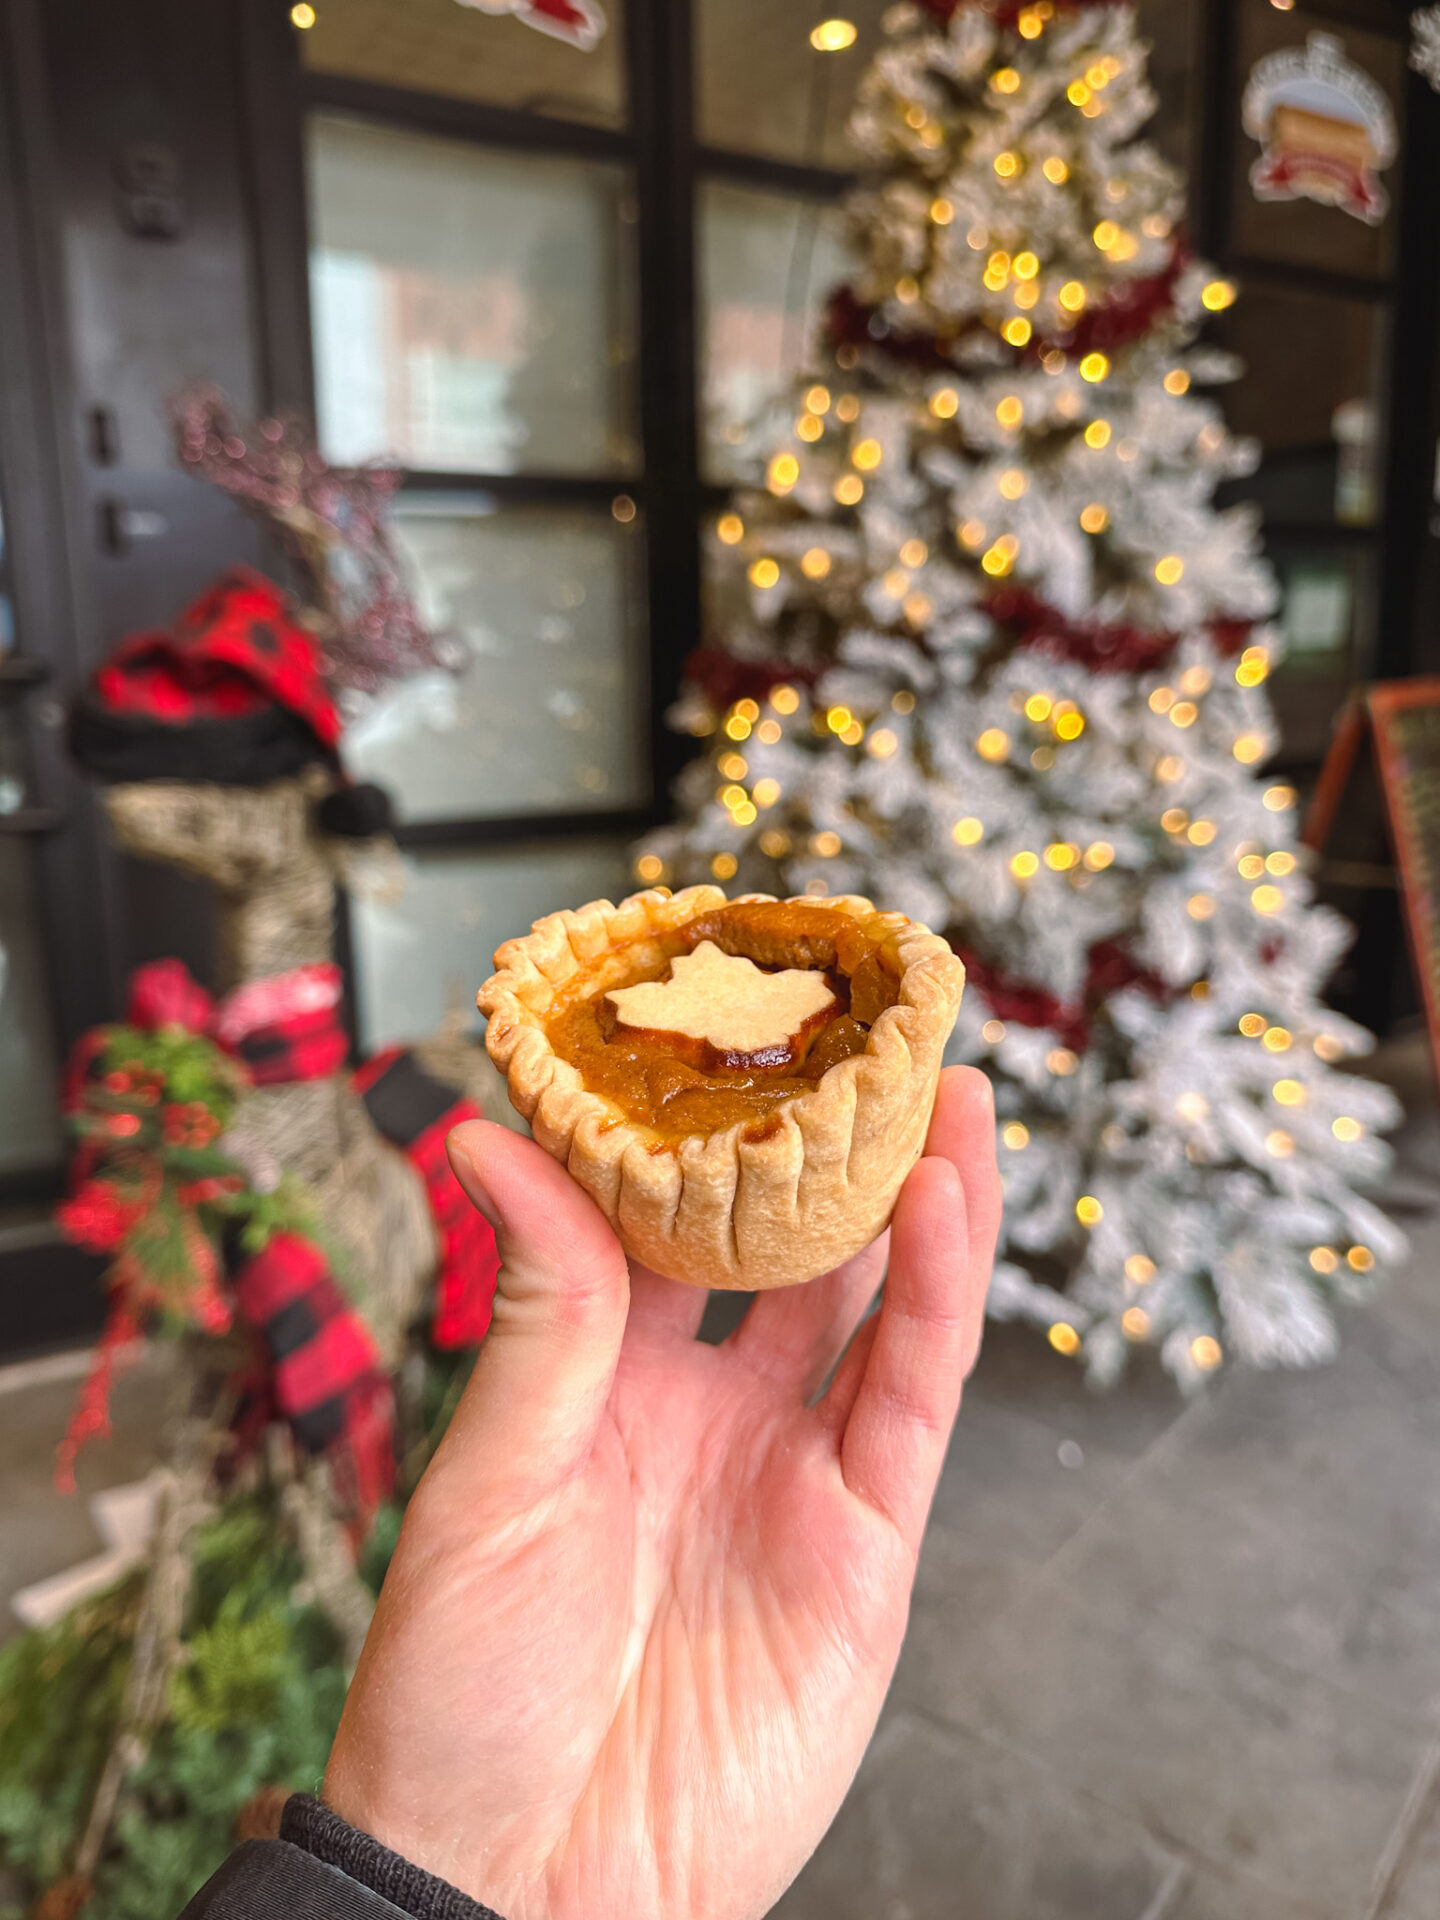 Butter tart from The Maid's Cottage in Newmarket, Ontario